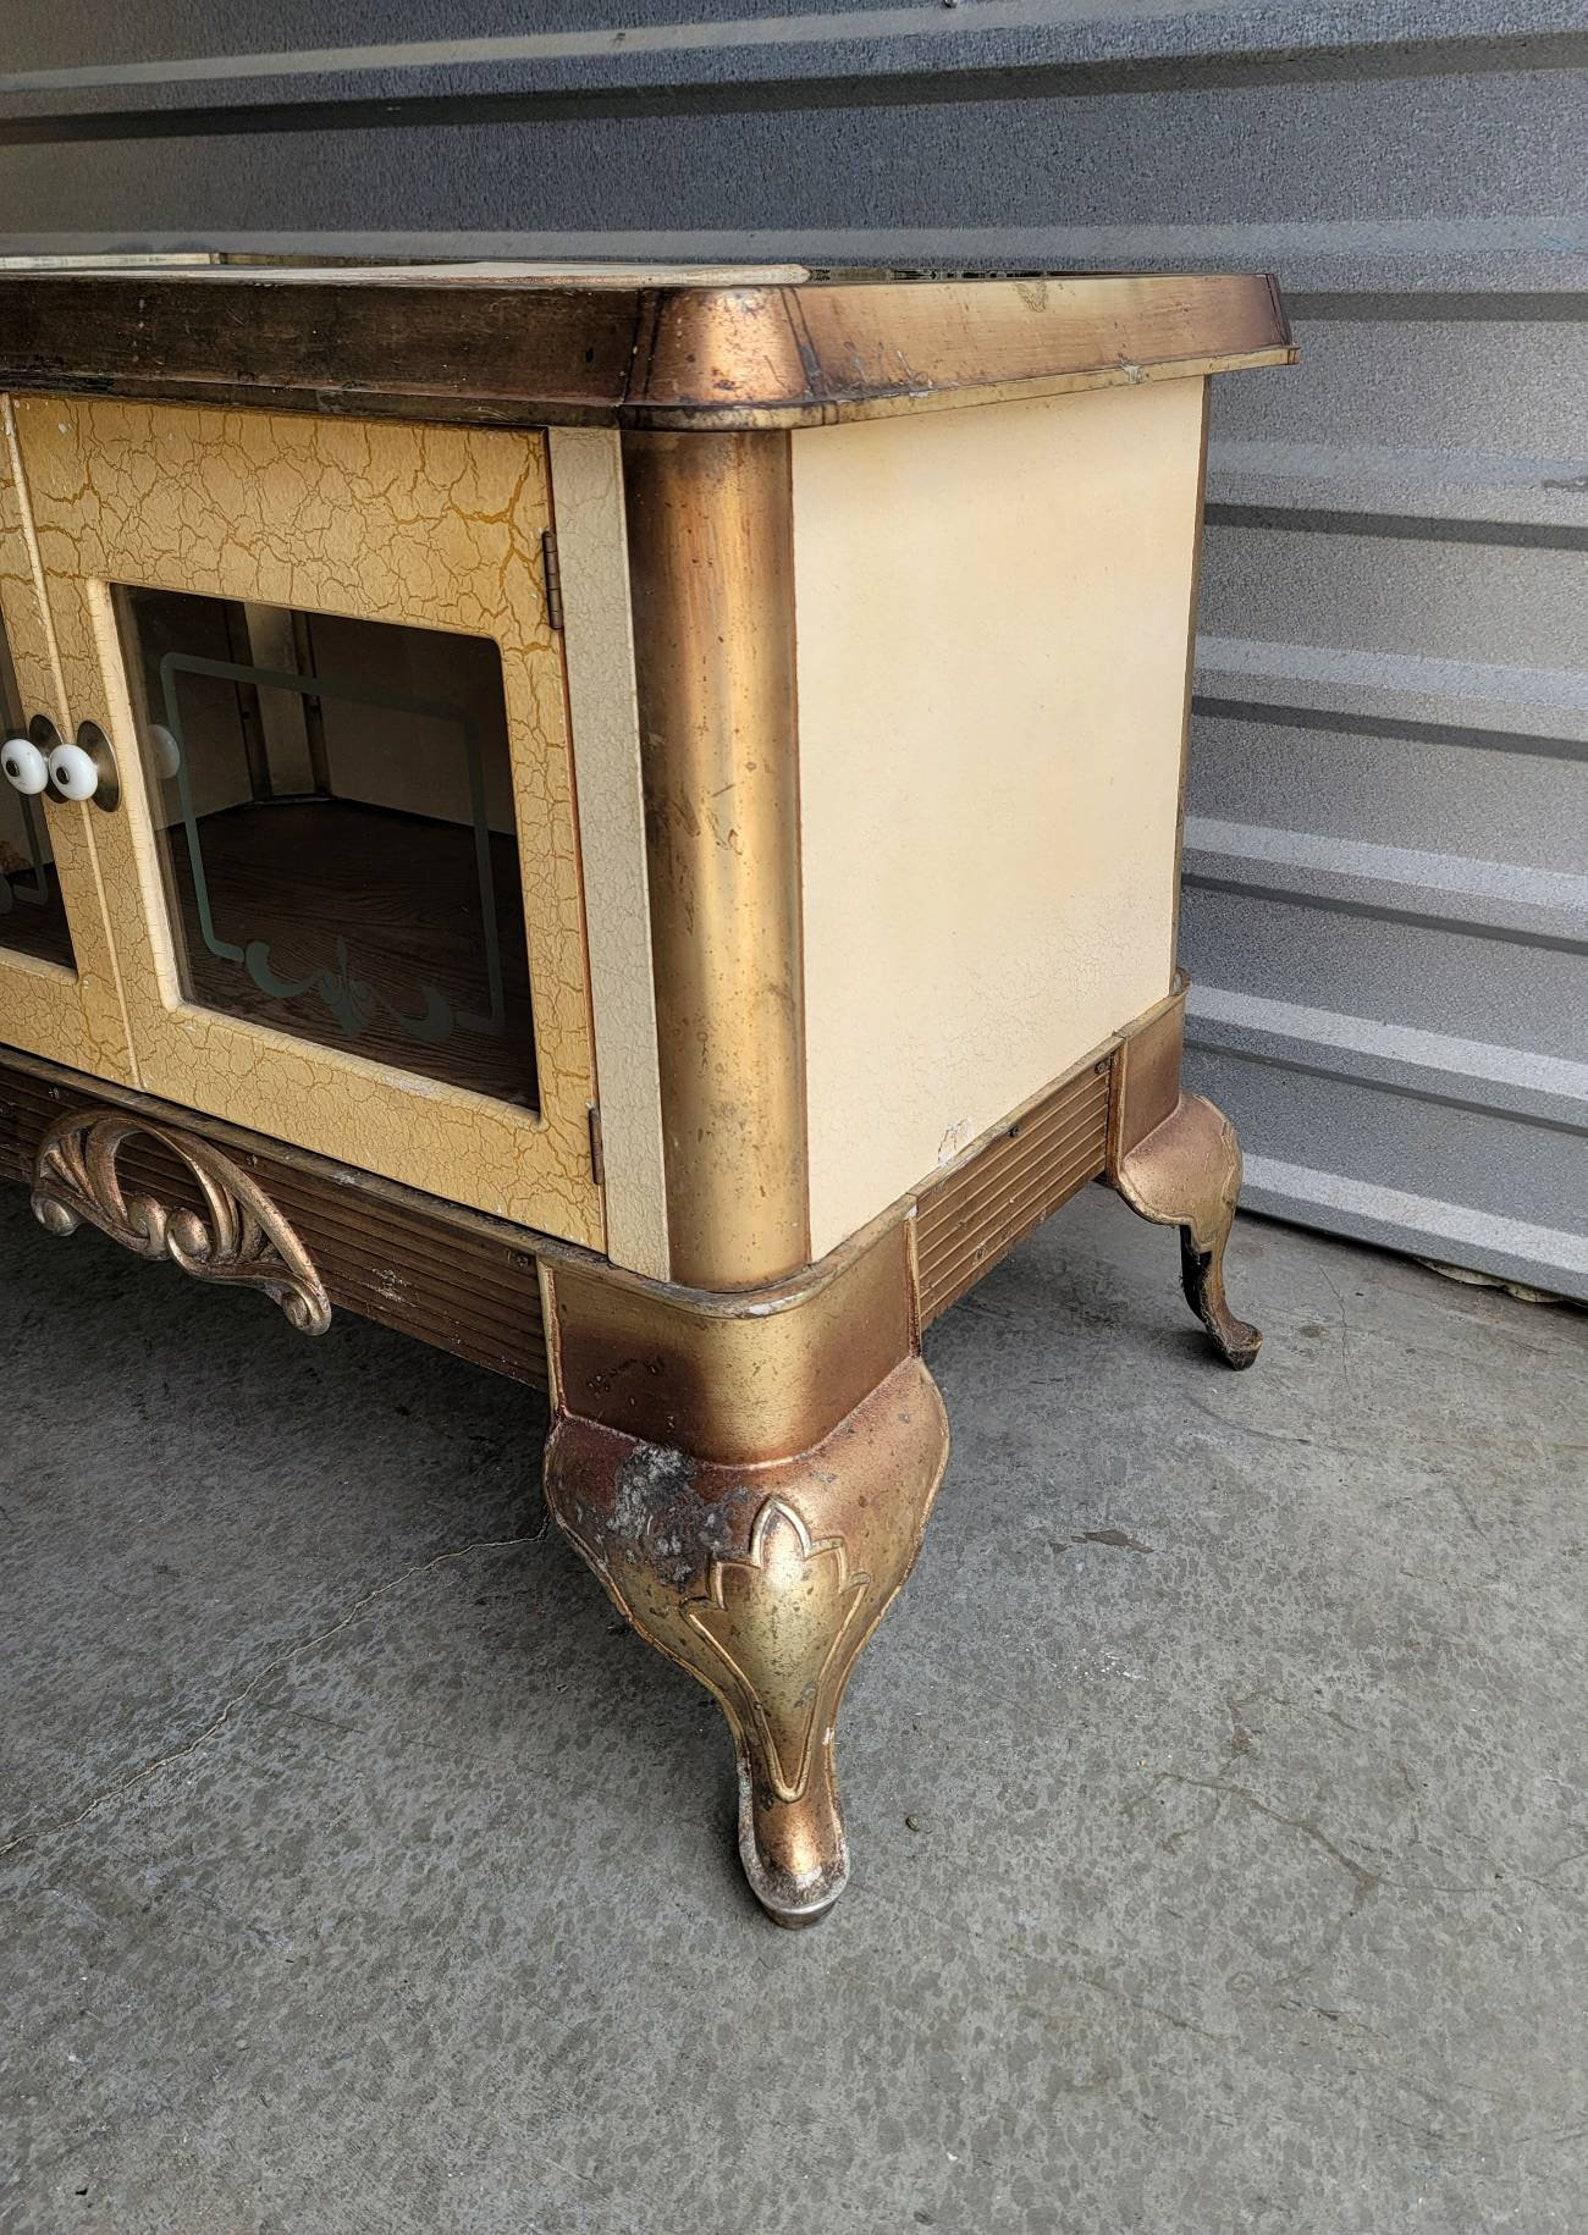 Art Deco Antique American Early Kitchen Stove Now Console Table For Sale